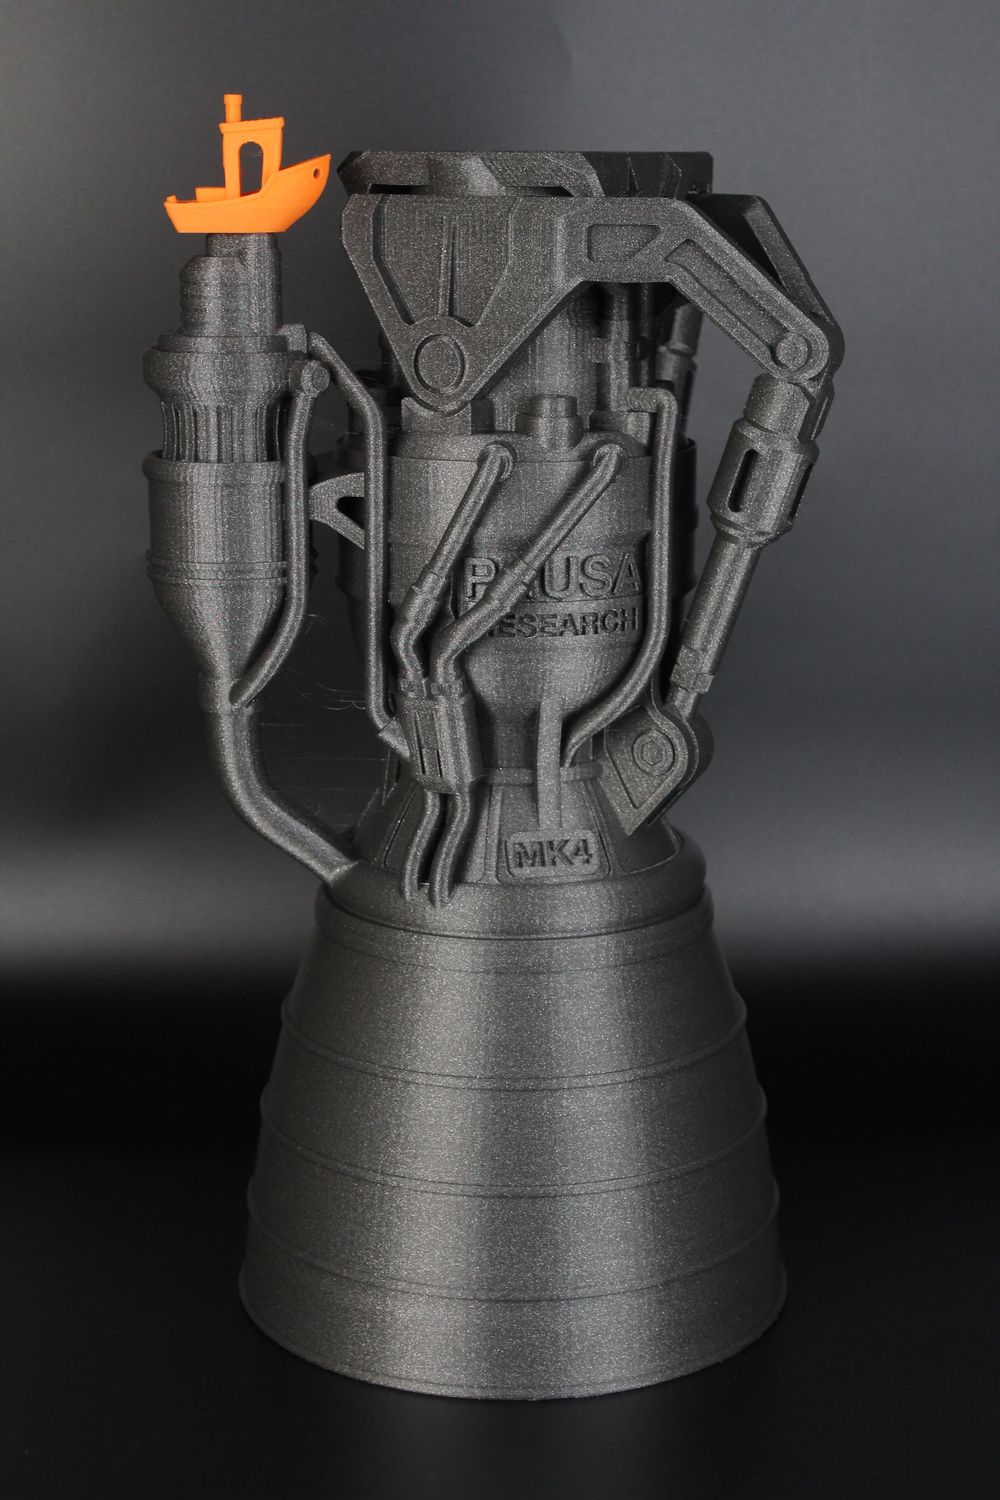 Creality CR M4 Review Prusa Rocket1 | Creality CR-M4 Review: Large Format 3D Printer